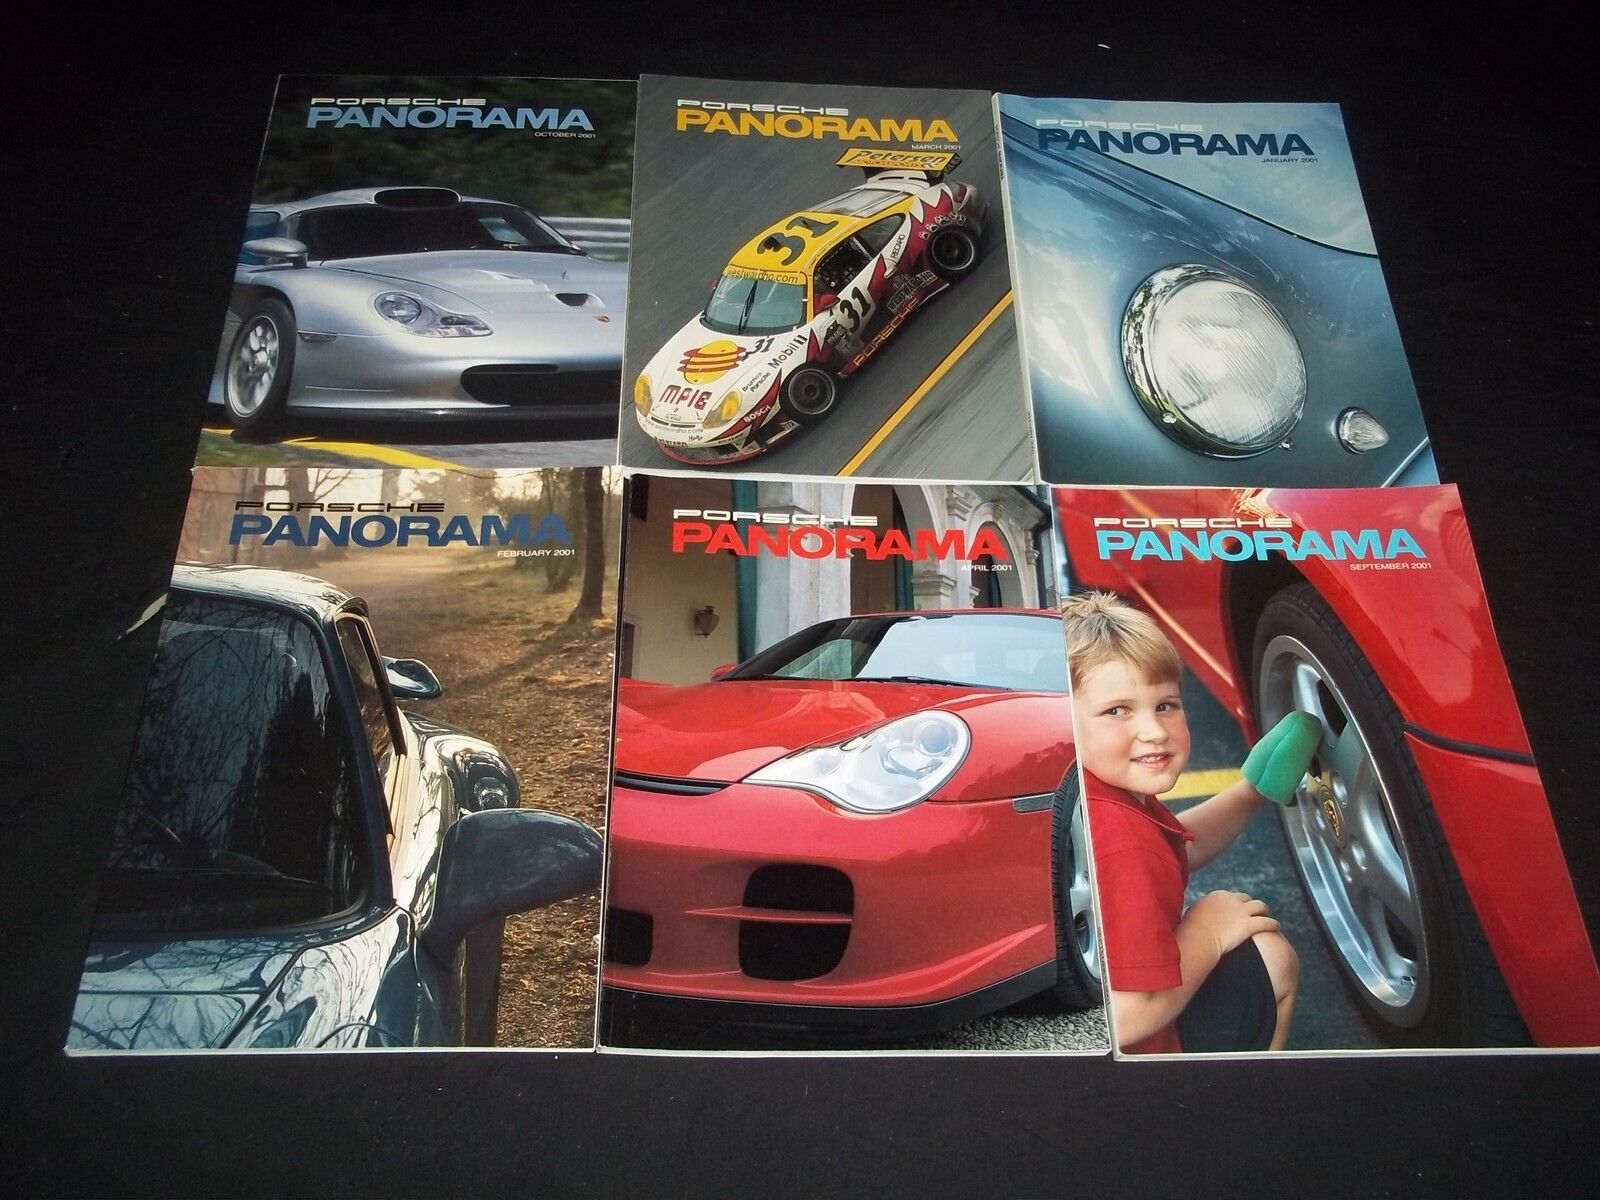 2001 PORSCHE PANORAMA MAGAZINE LOT OF 6 ISSUES - GREAT FAST CAR ISSUES - M 523